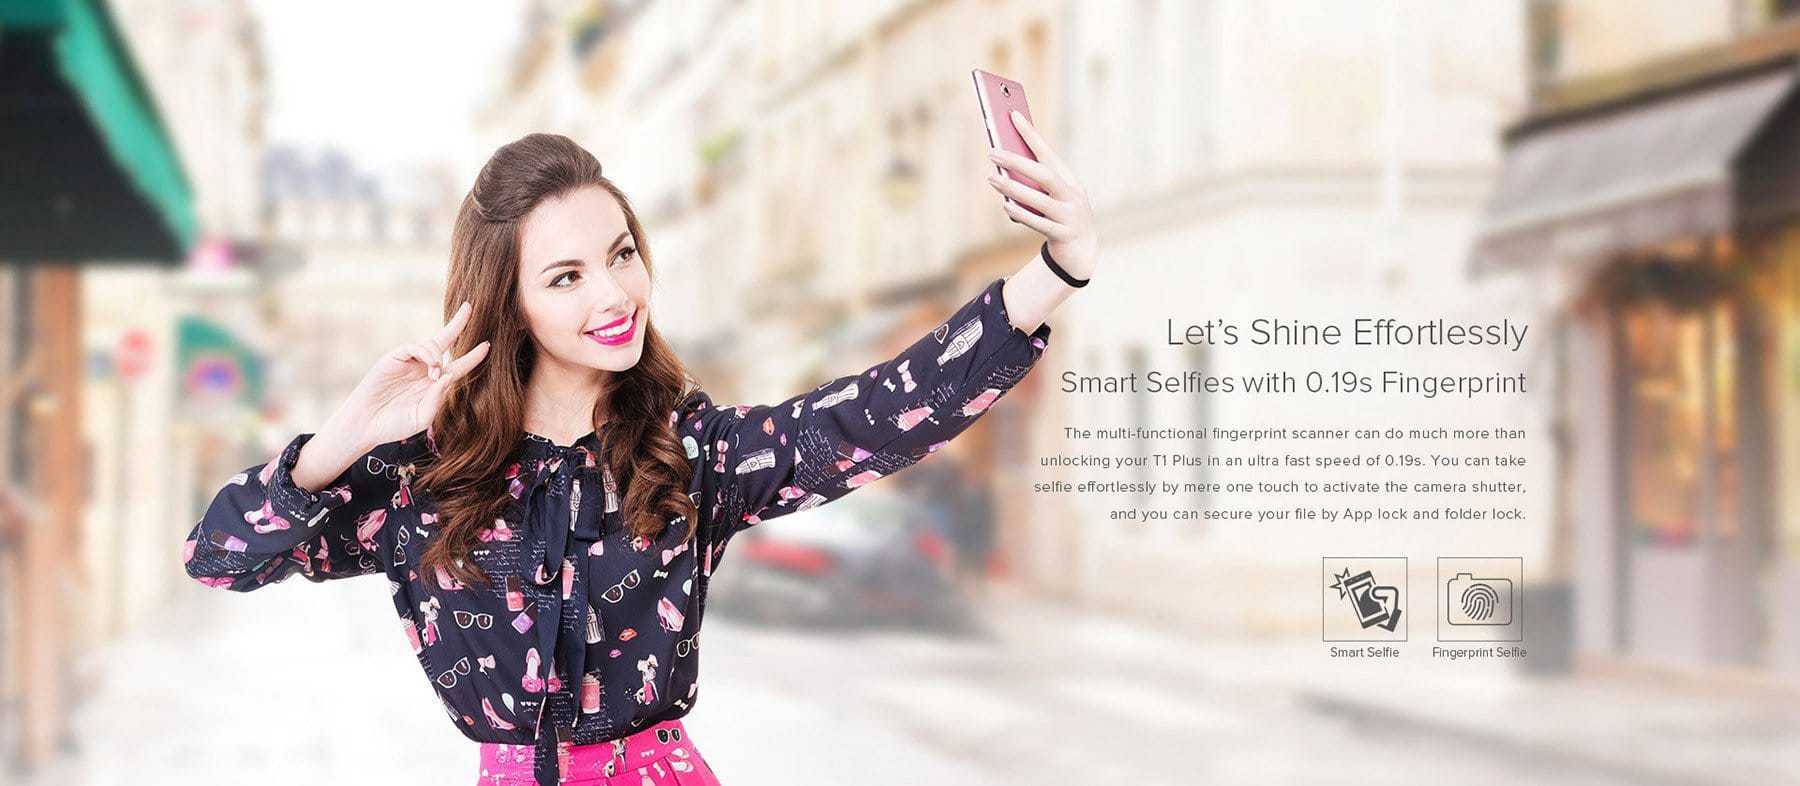 Leagoo T1 Plus 4G Phablet Launched